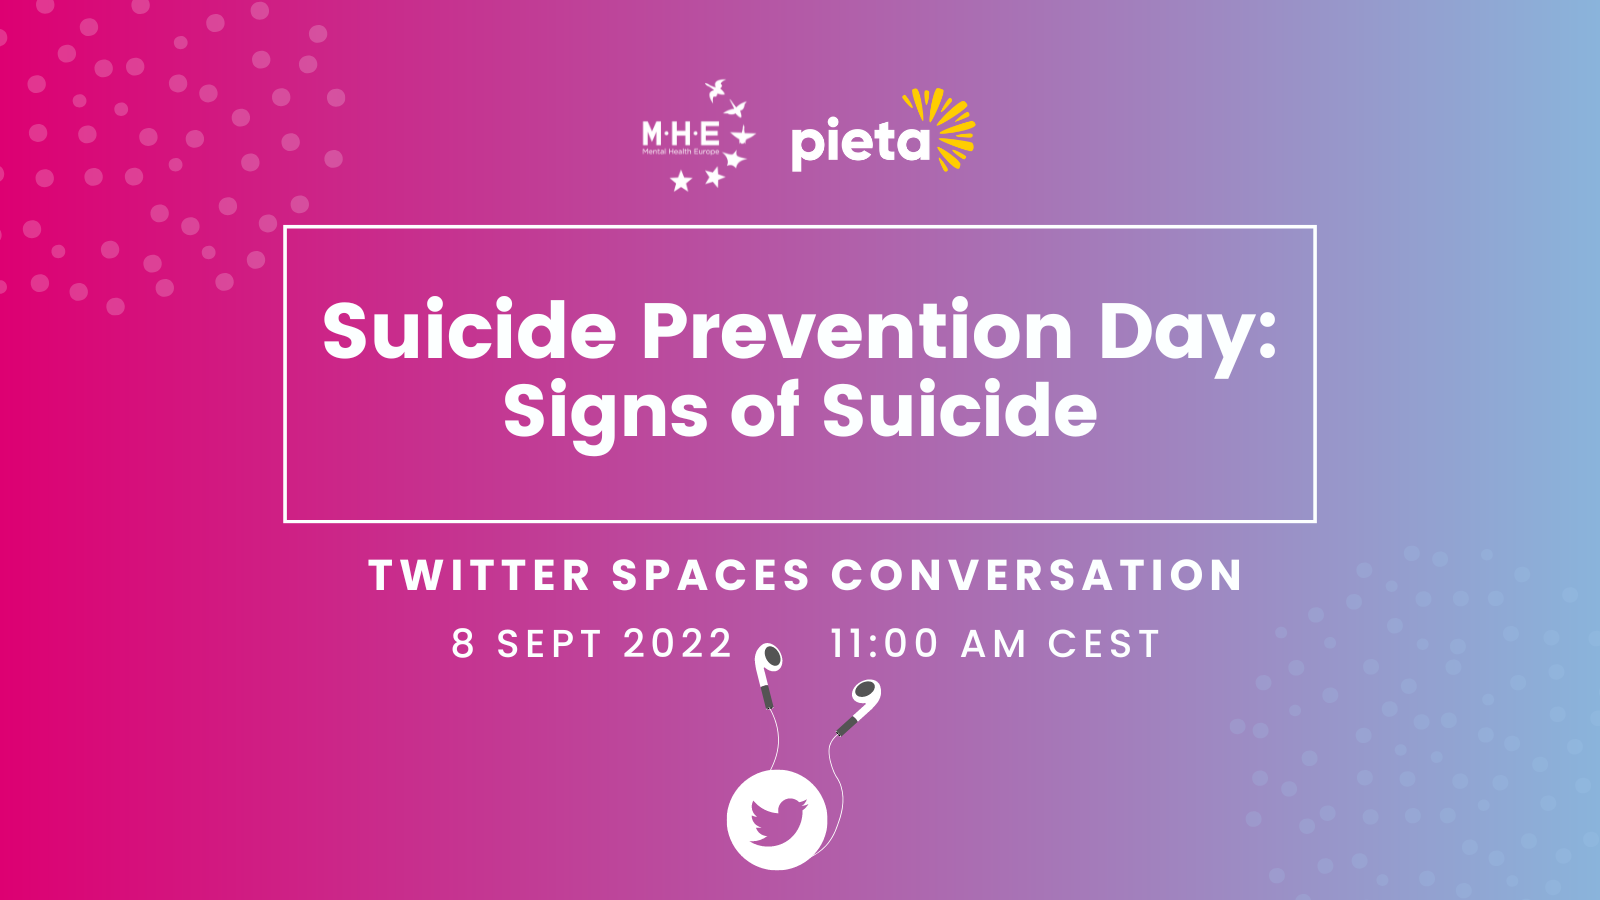 Suicide Prevention Day: Signs of Suicide. Thursday 8 September at 11 AM CEST